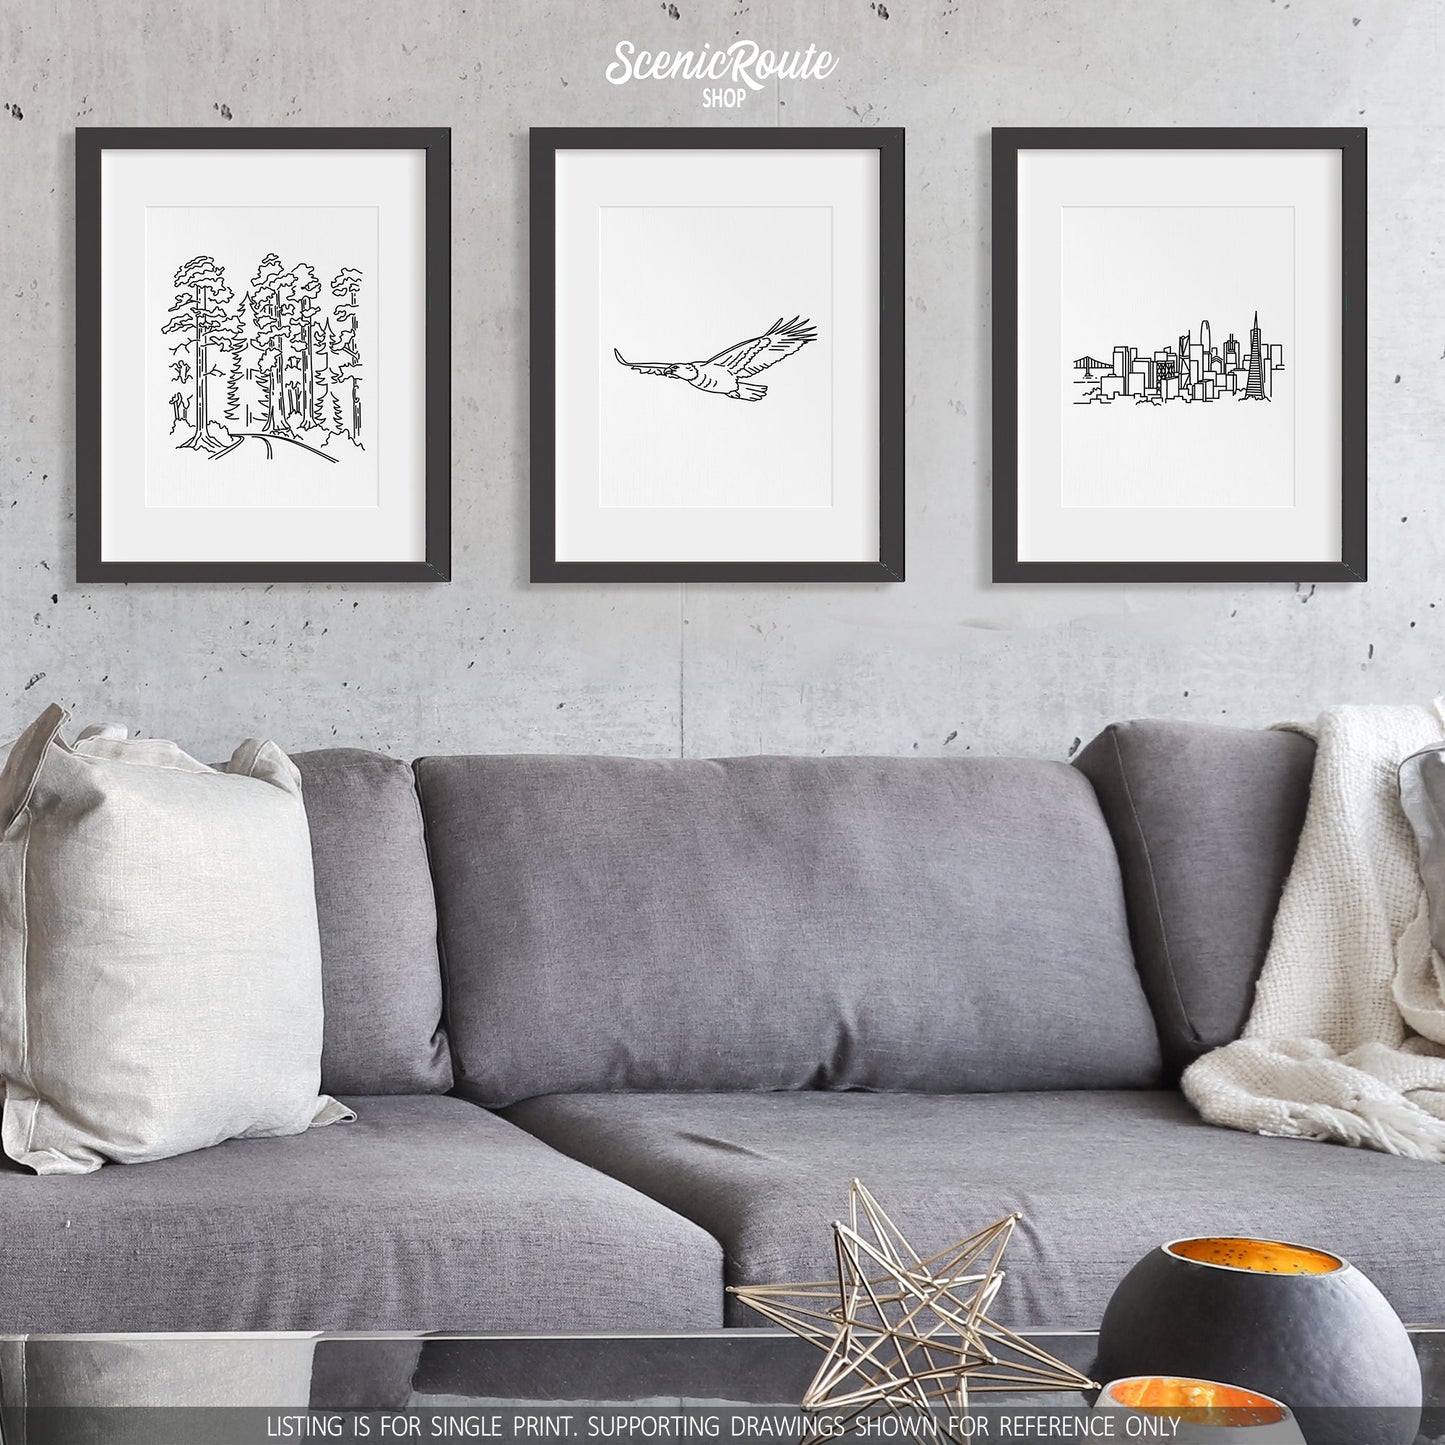 A group of three framed drawings on a wall above a couch. The line art drawings include Redwood National Park, an Eagle, and the San Francisco Skyline